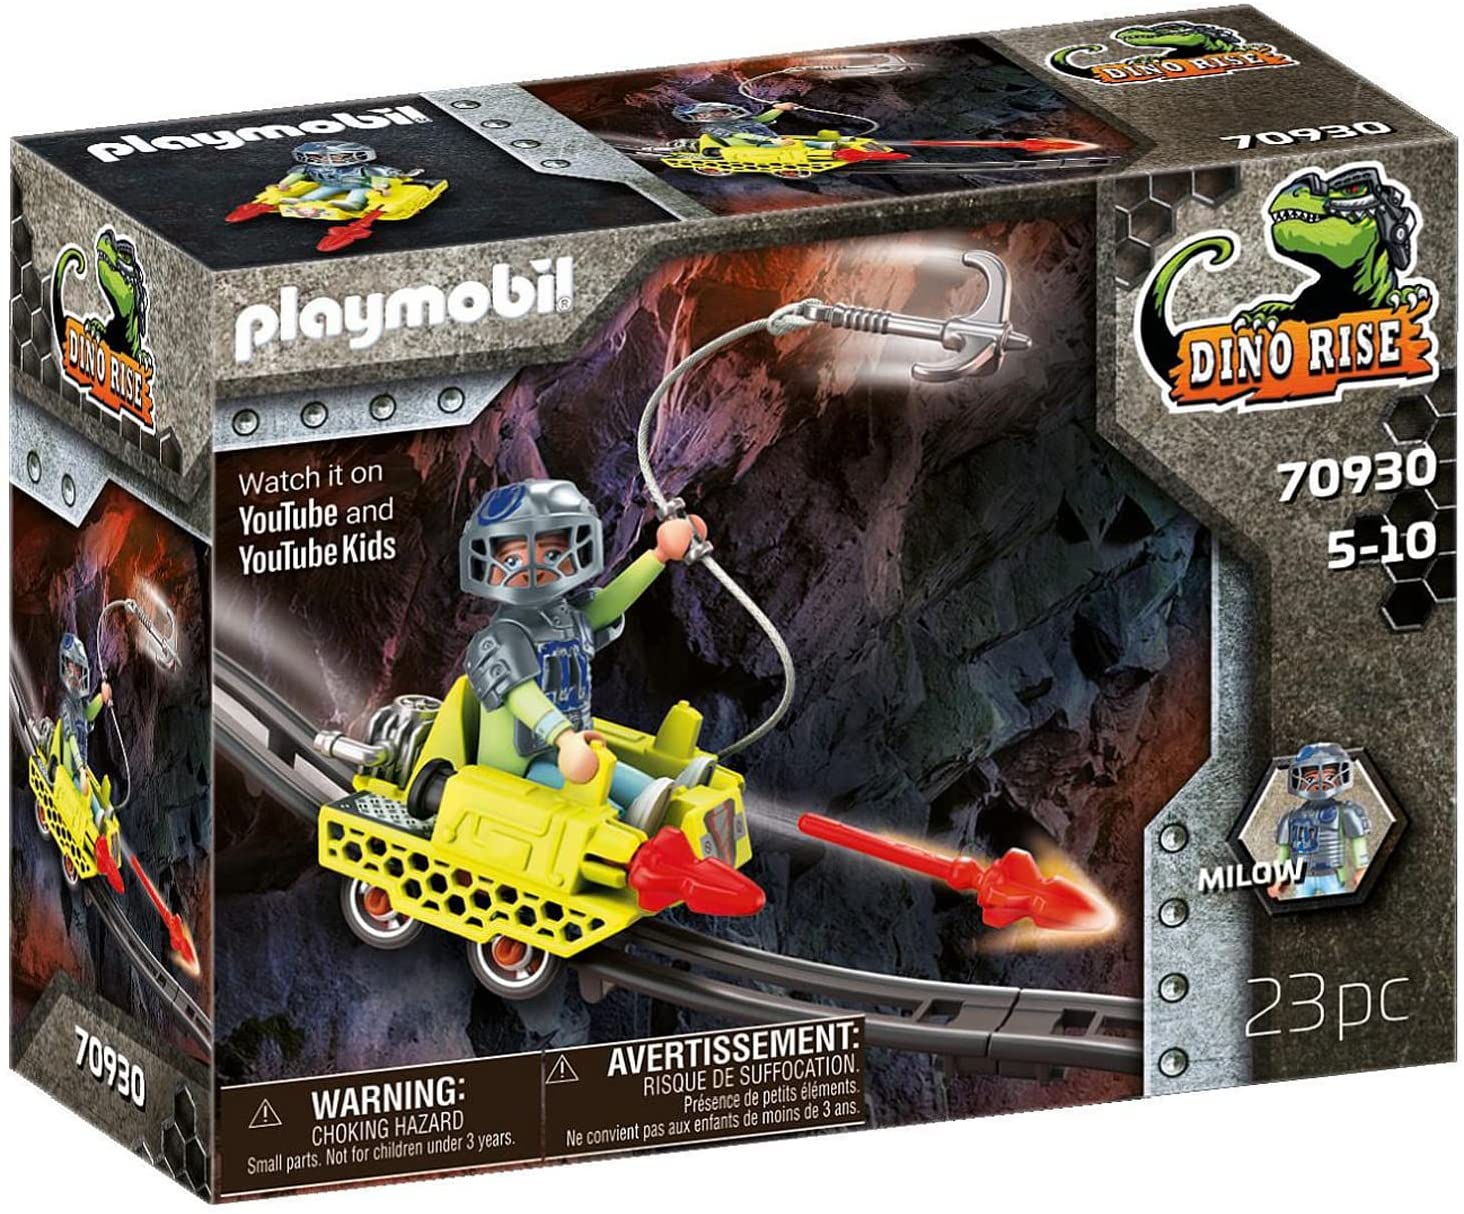 PLAYMOBIL Dino Rise 70930 Mine Cruiser, Can be Combined with Railways, Toy for Children from 5 Years